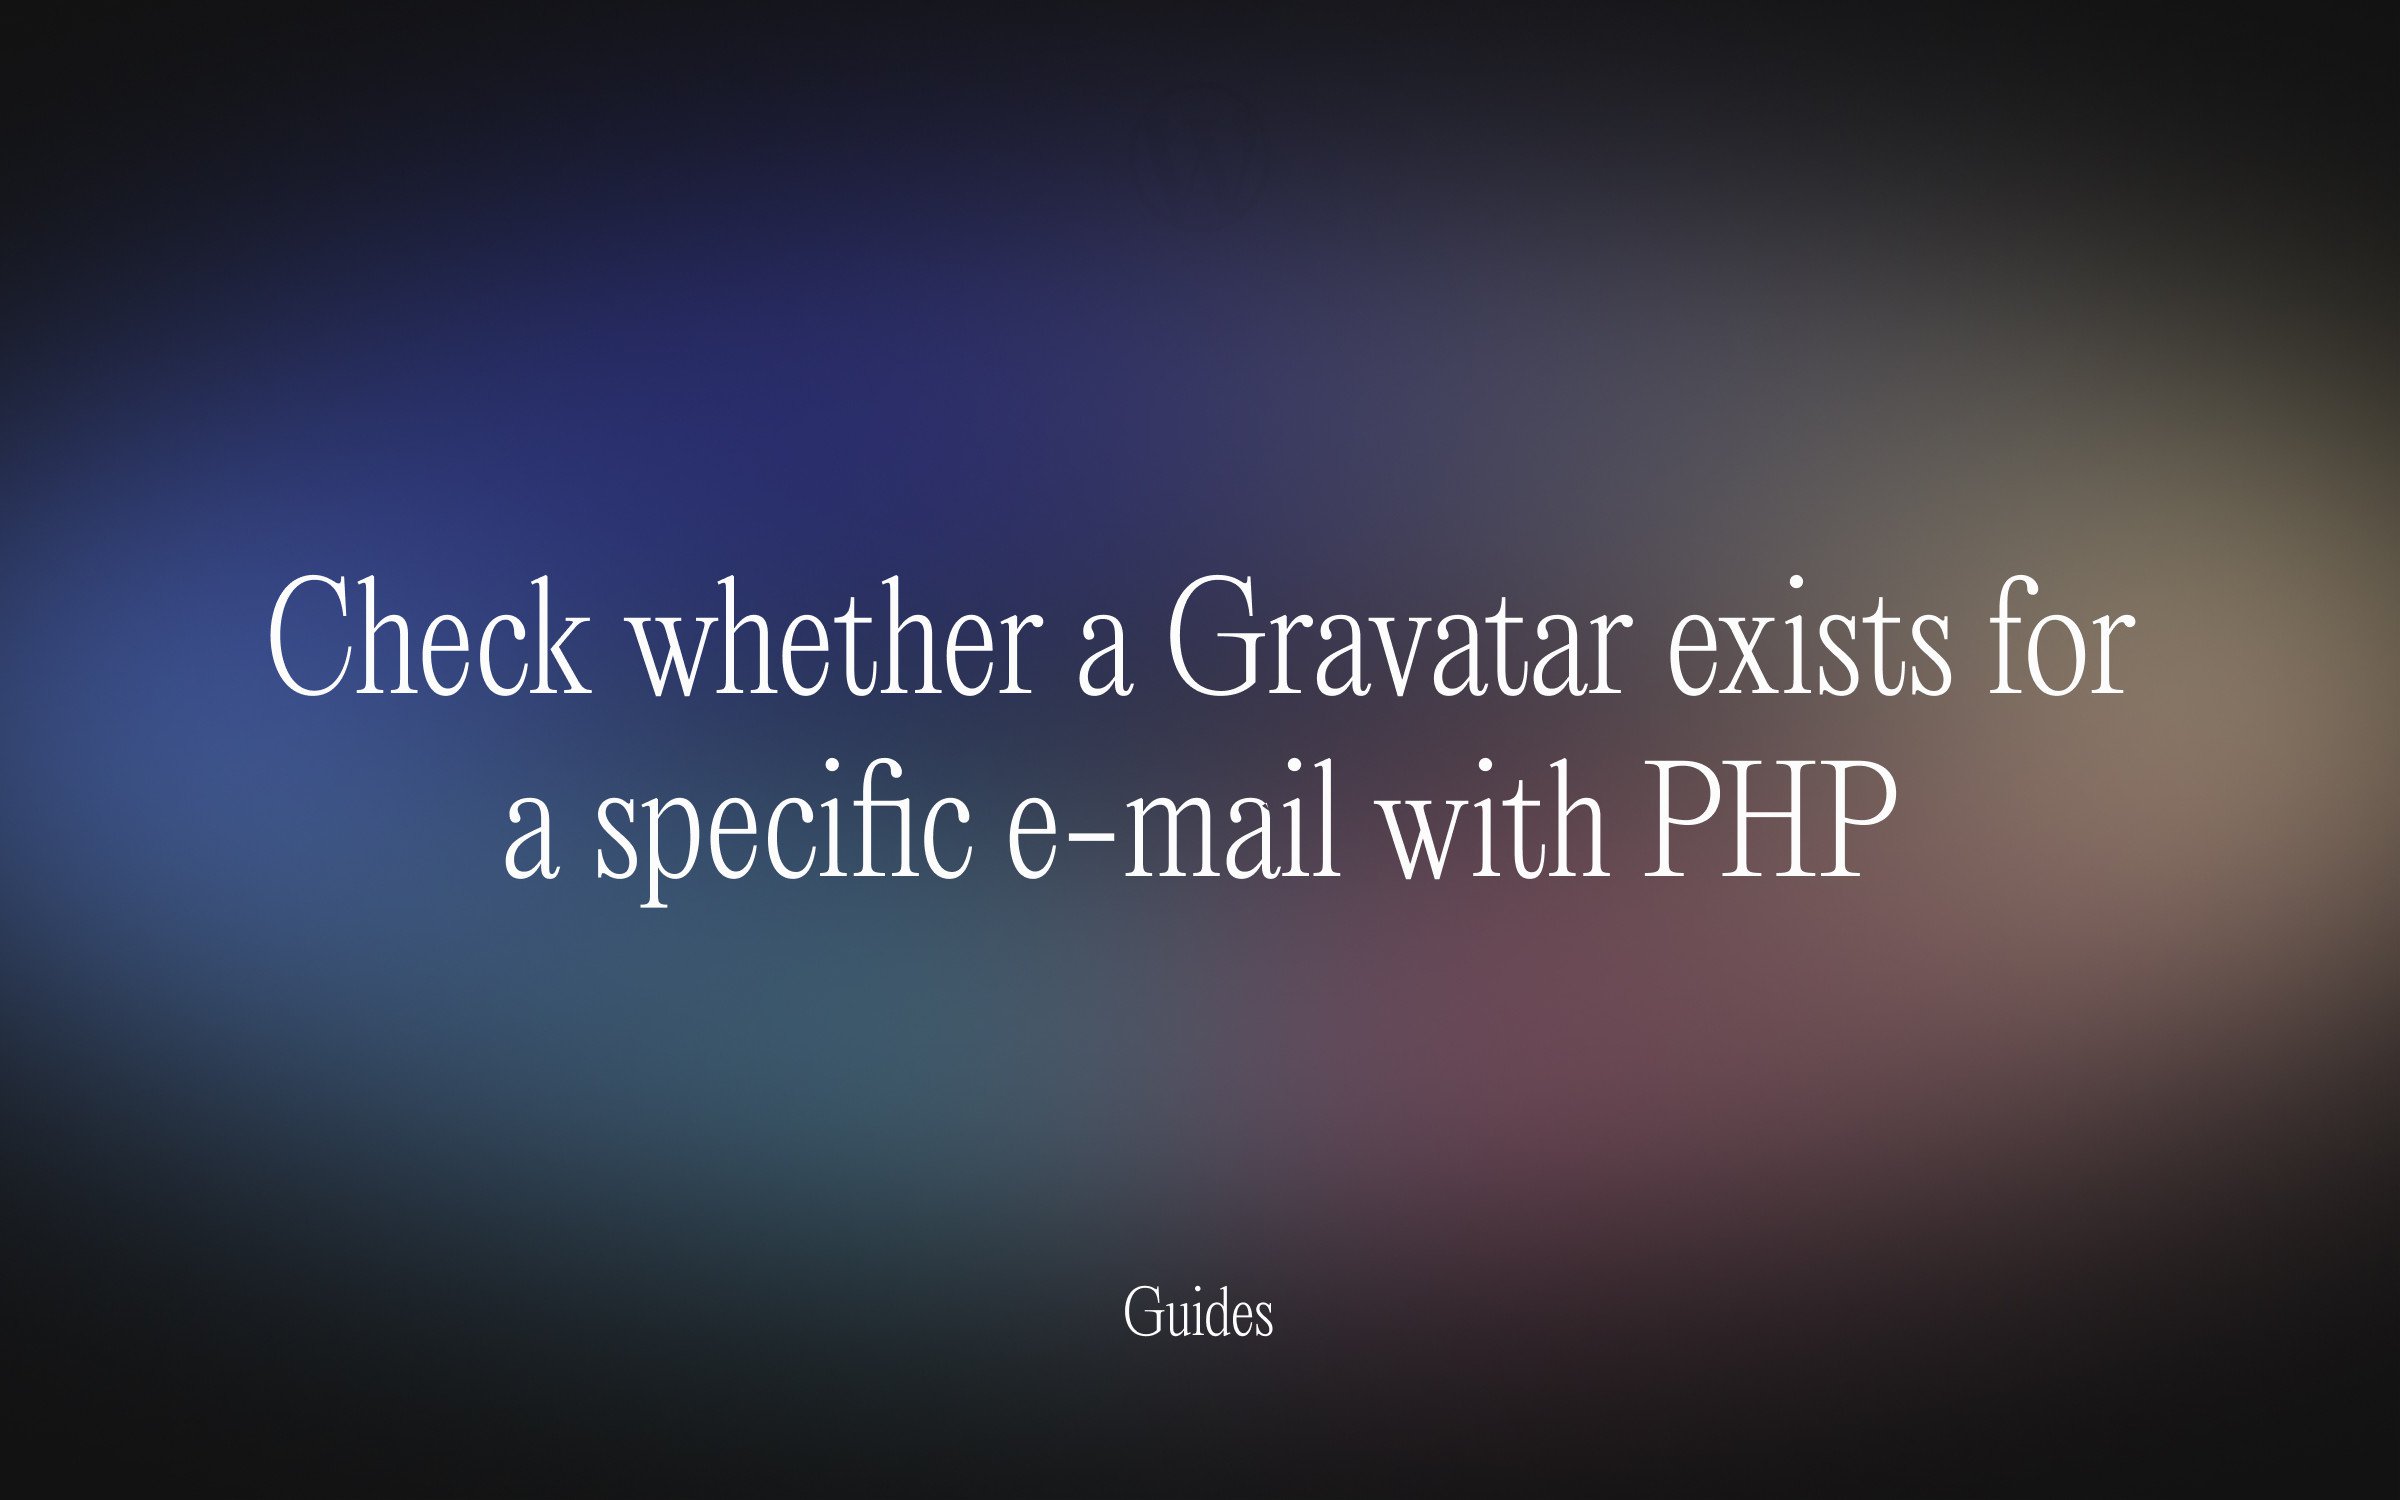 Check whether a Gravatar exists for a specific e-mail